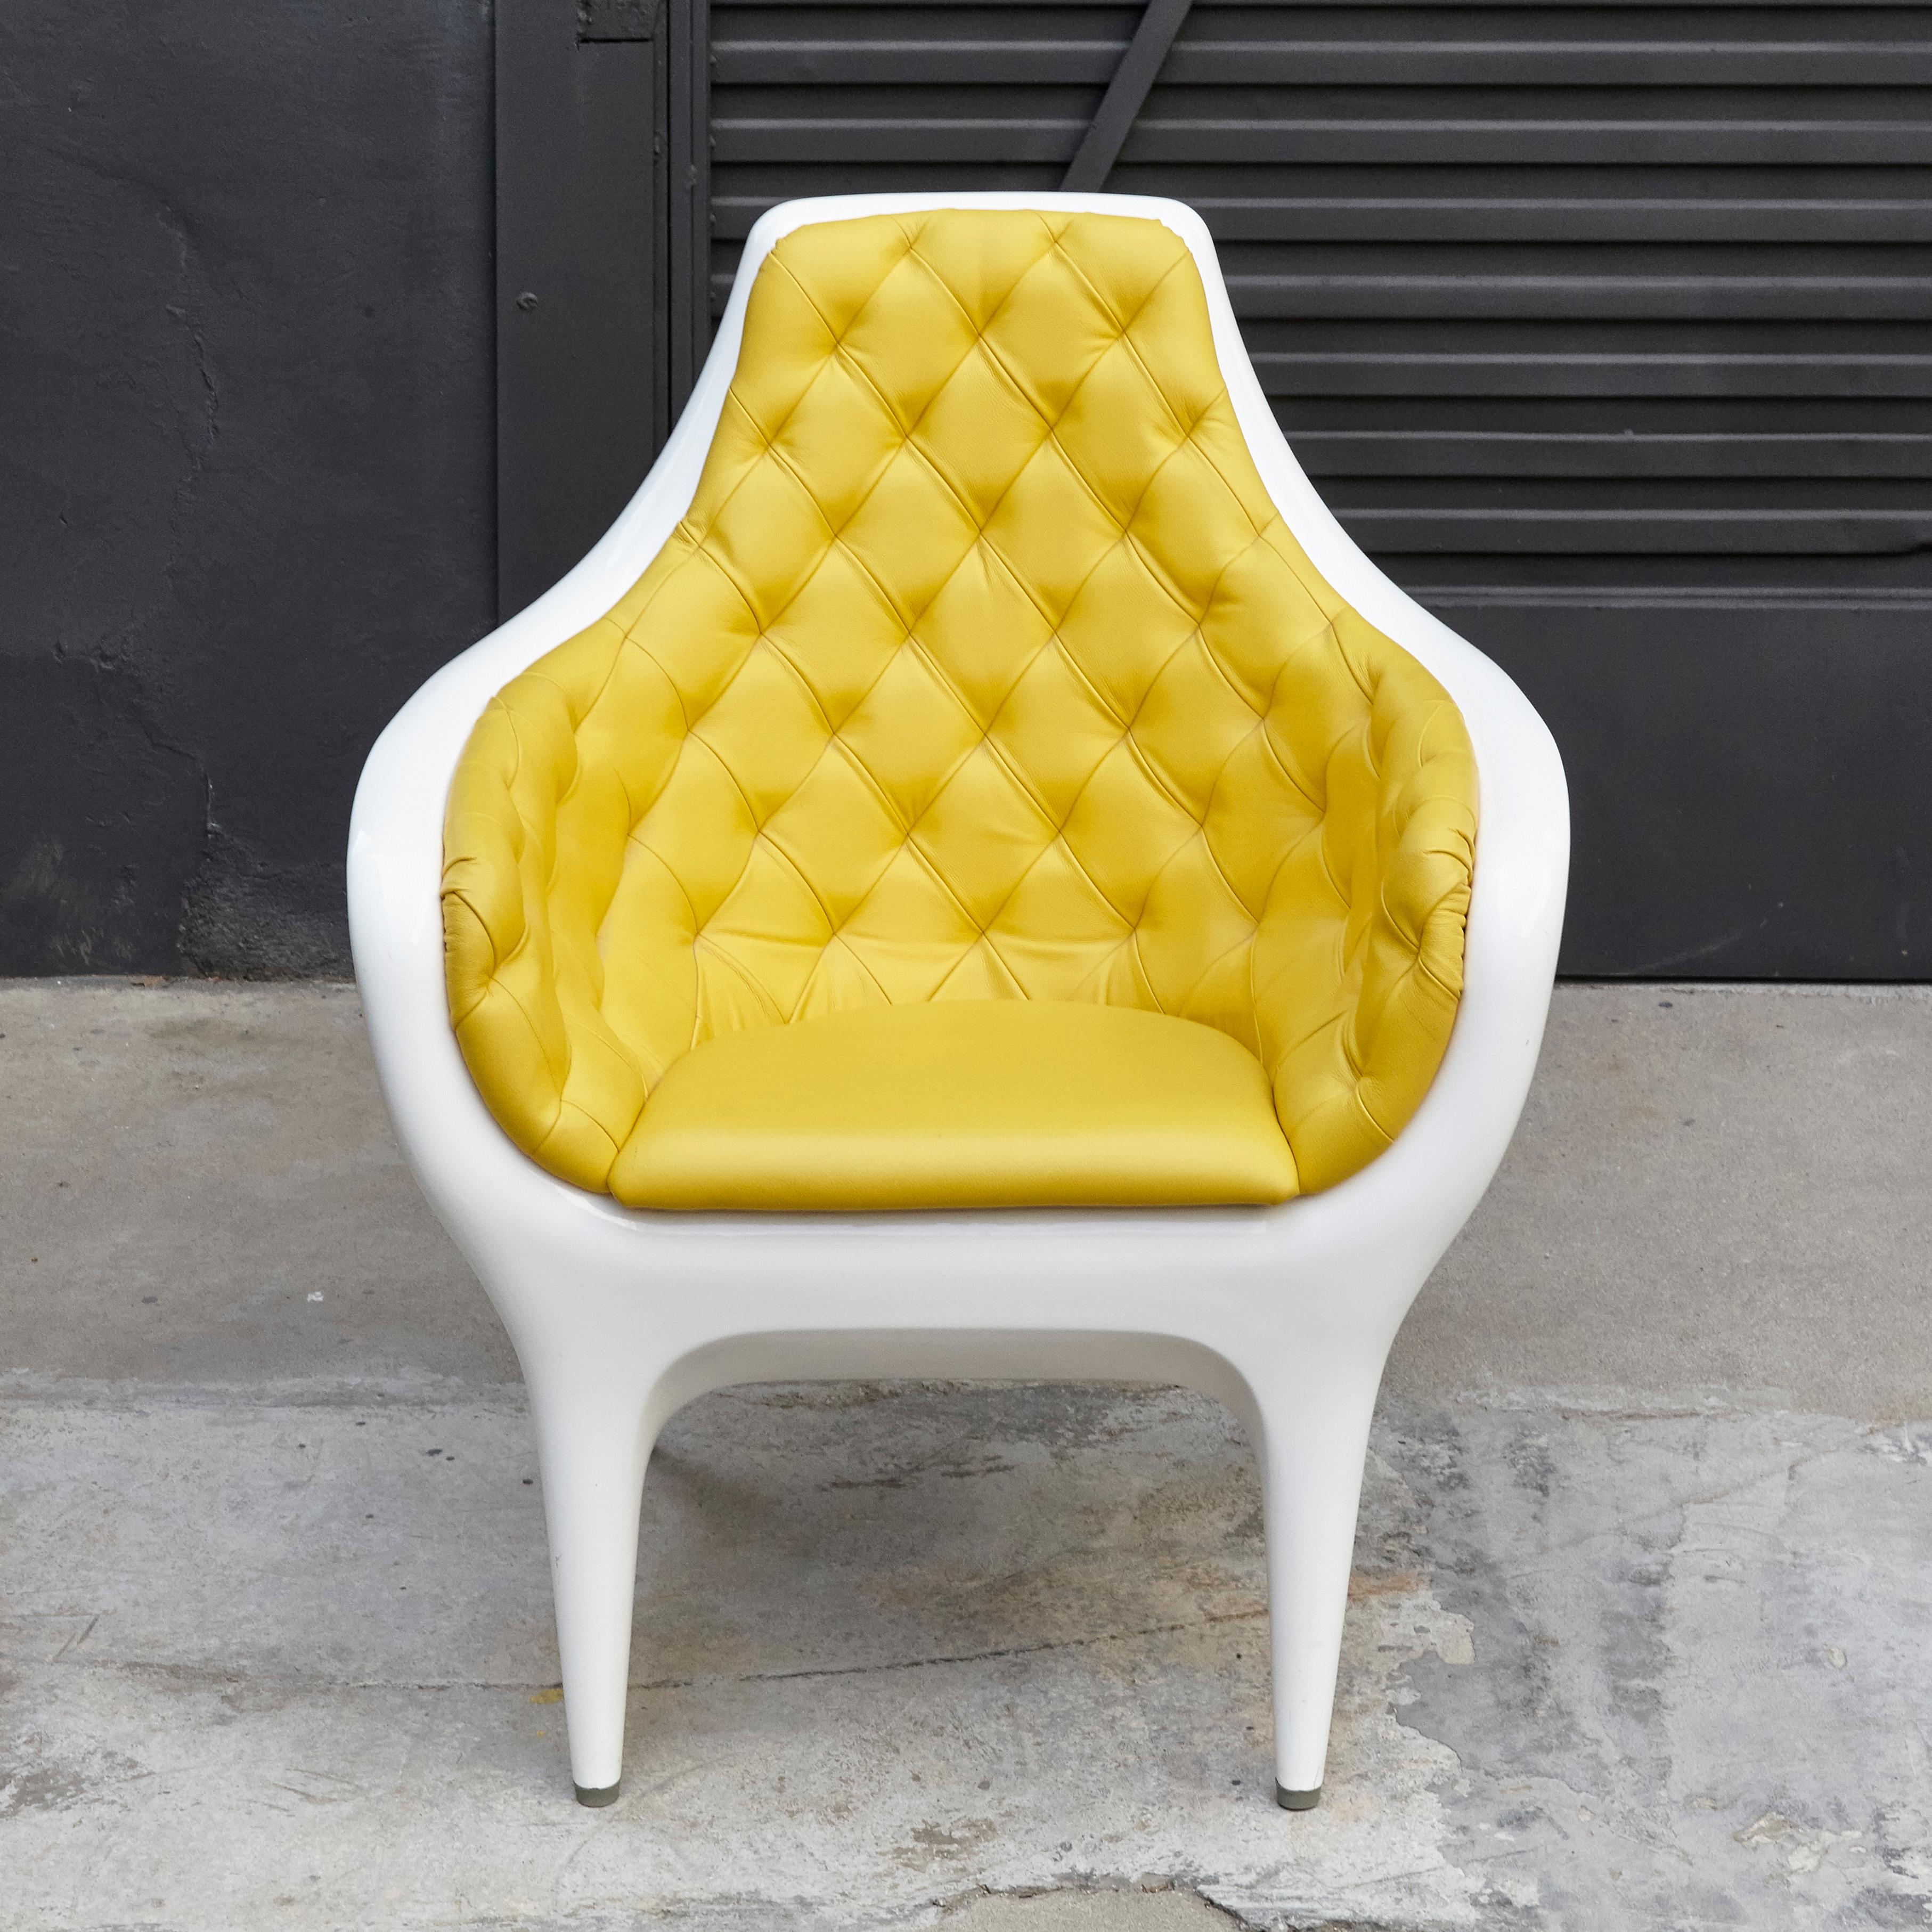 Armchair designed by Jaime Hayon produced by BD

Structure in high gloss lacquered rotomoulded polyethylene. Upholstered in leather caption.

Has some wear consistent of age and use.